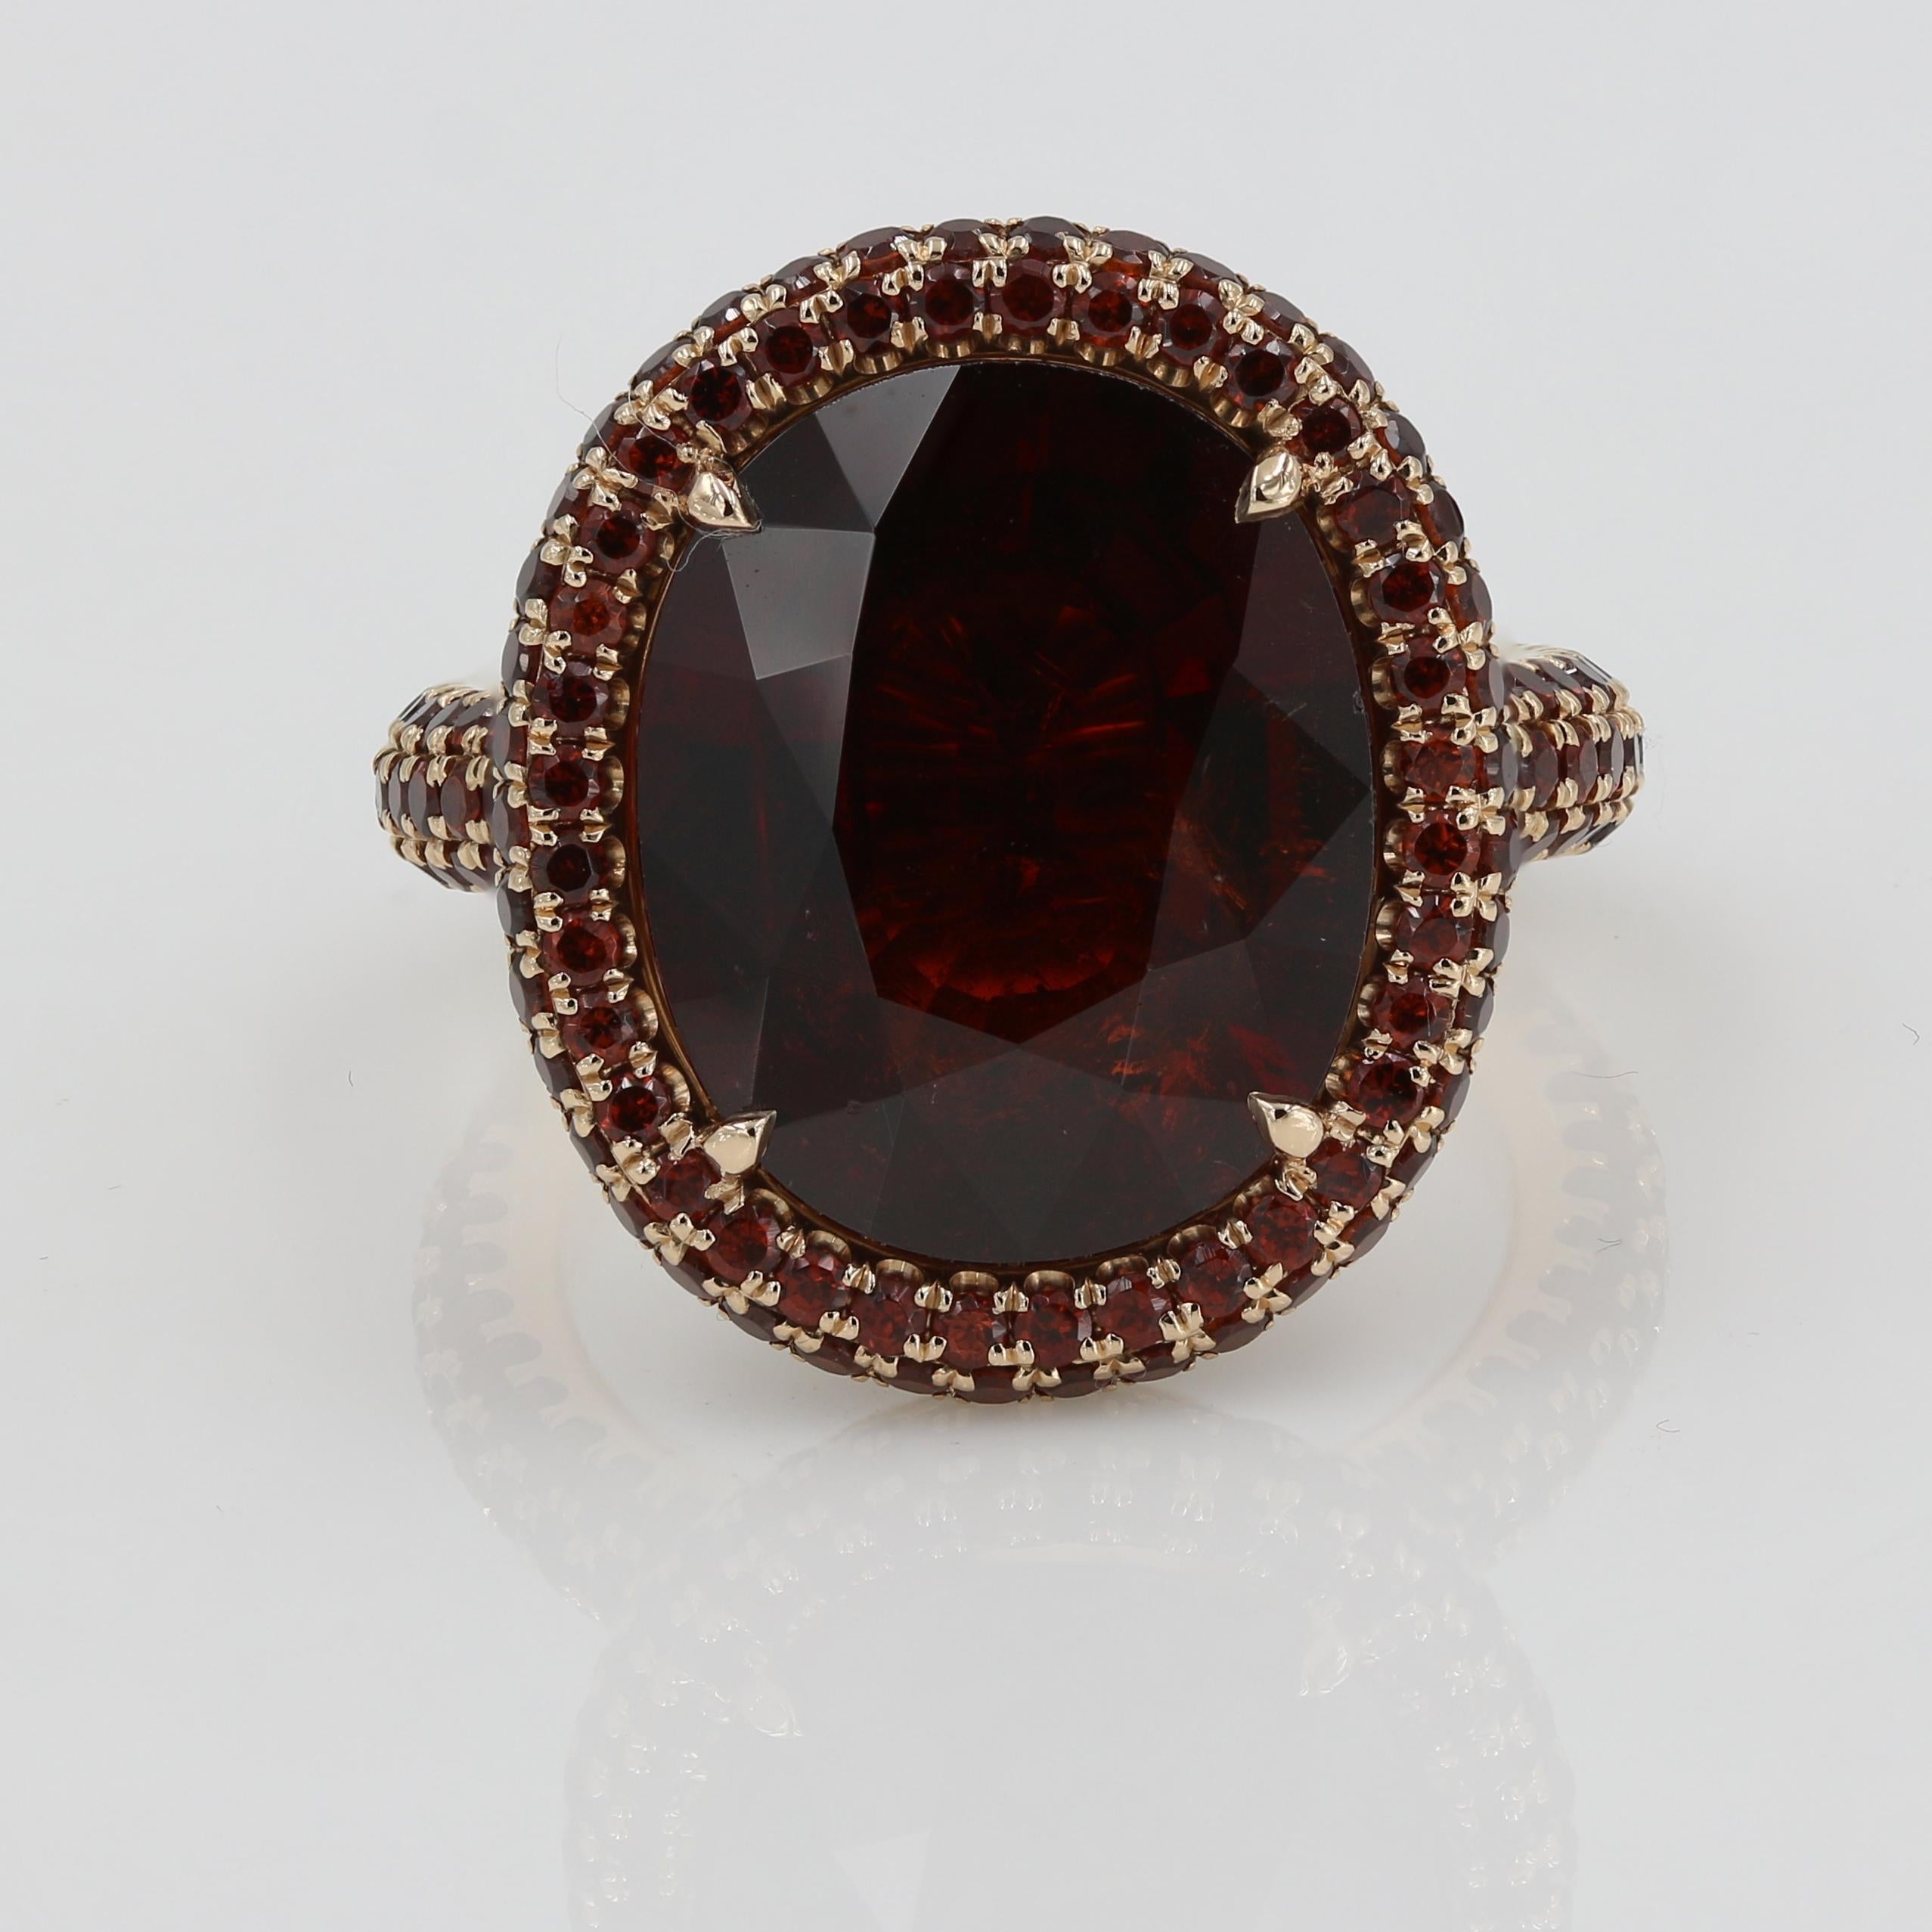 This “Bubble” cocktail ring in 18kt. Rose gold features an impressive 9.13cts. fine Oval cut Garnet. 266 small cut round garnets frame the large oval center and continue all the way around the band in a classic eternity style setting weighing